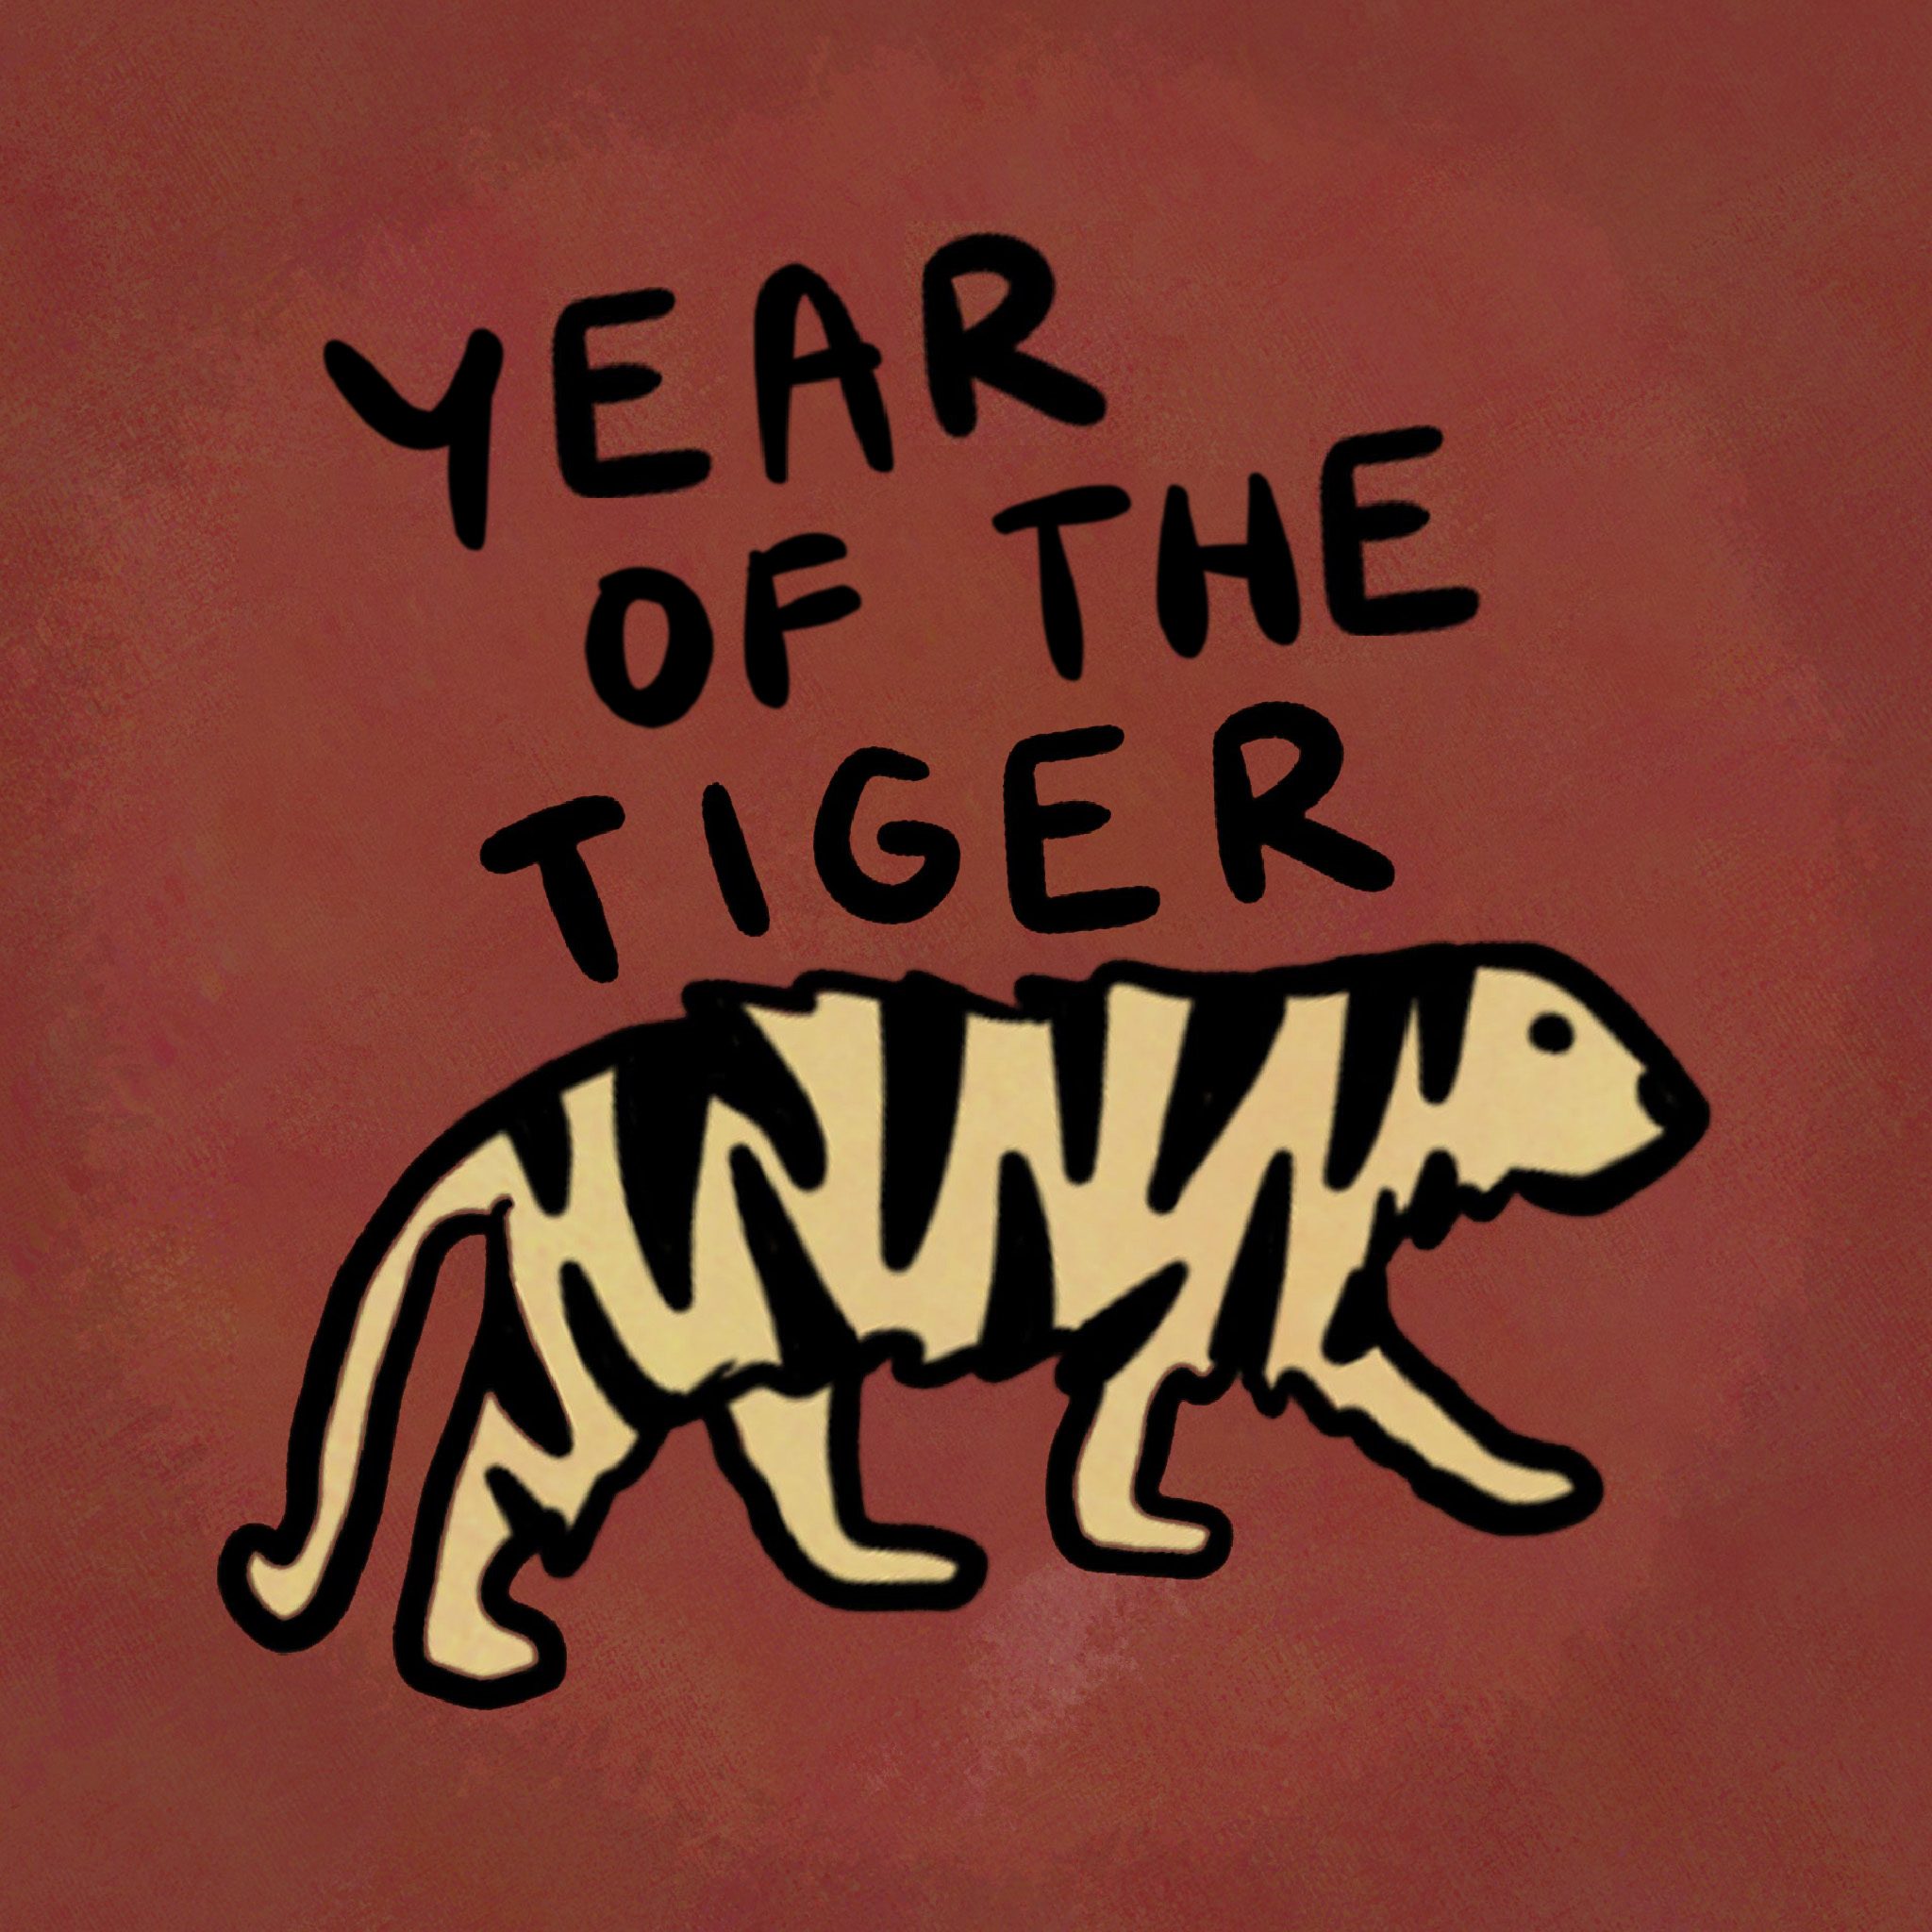 2022 Chinese Zodiac: Year of the Tiger Predictions